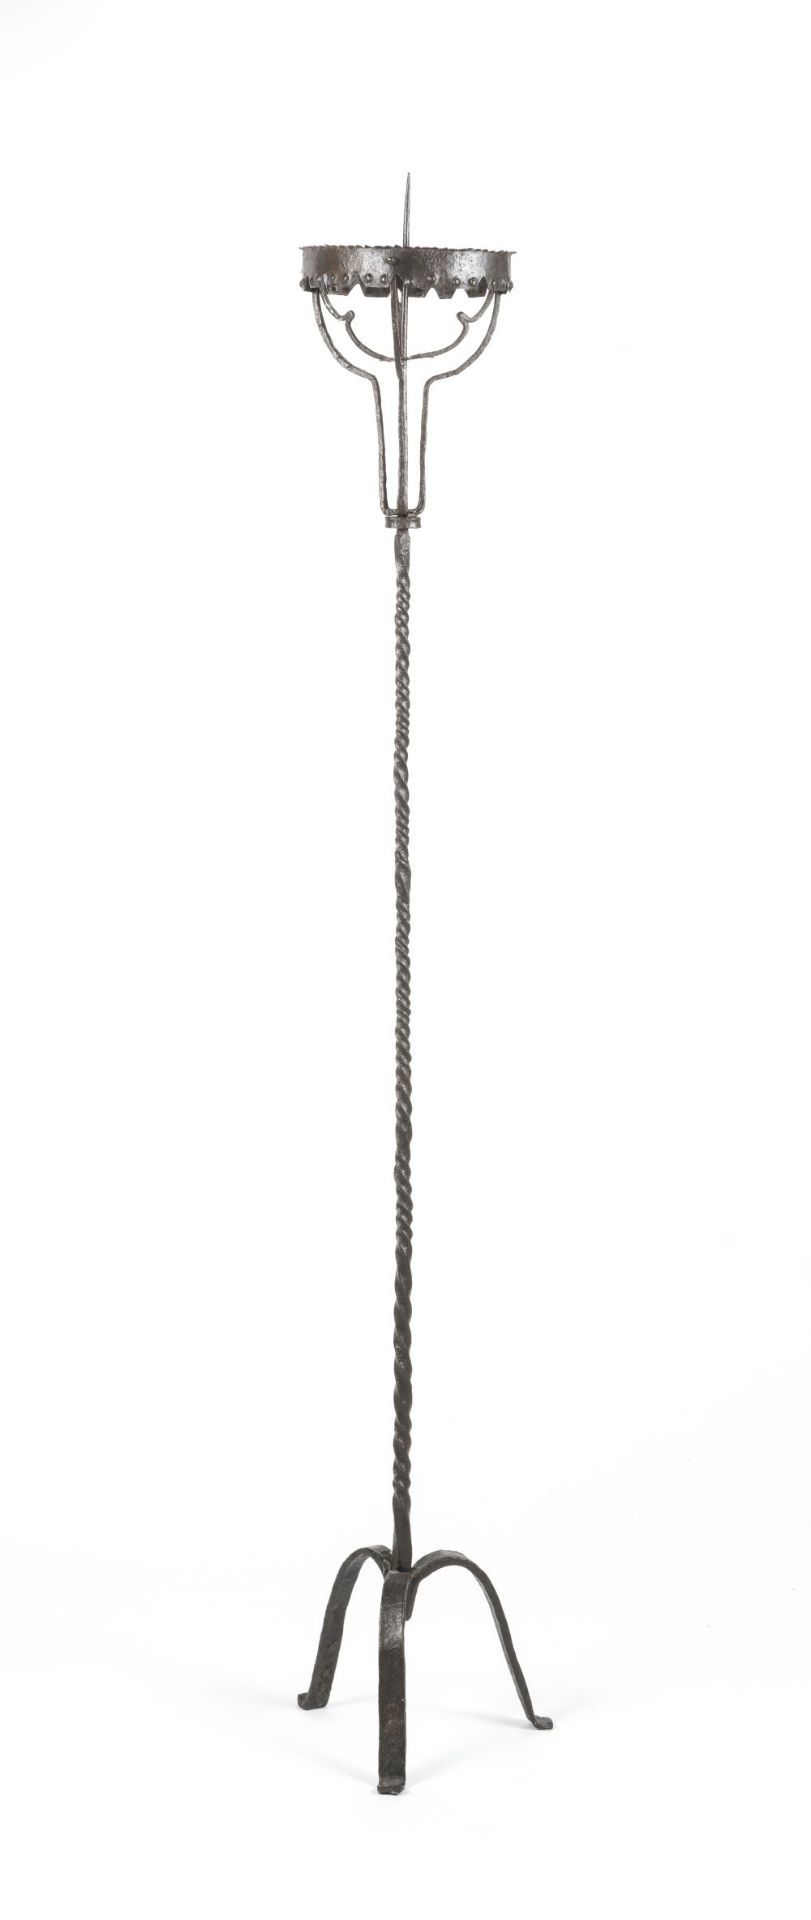 A WROUGHT IRON TORCHERE Possibly Spanish, 18th century